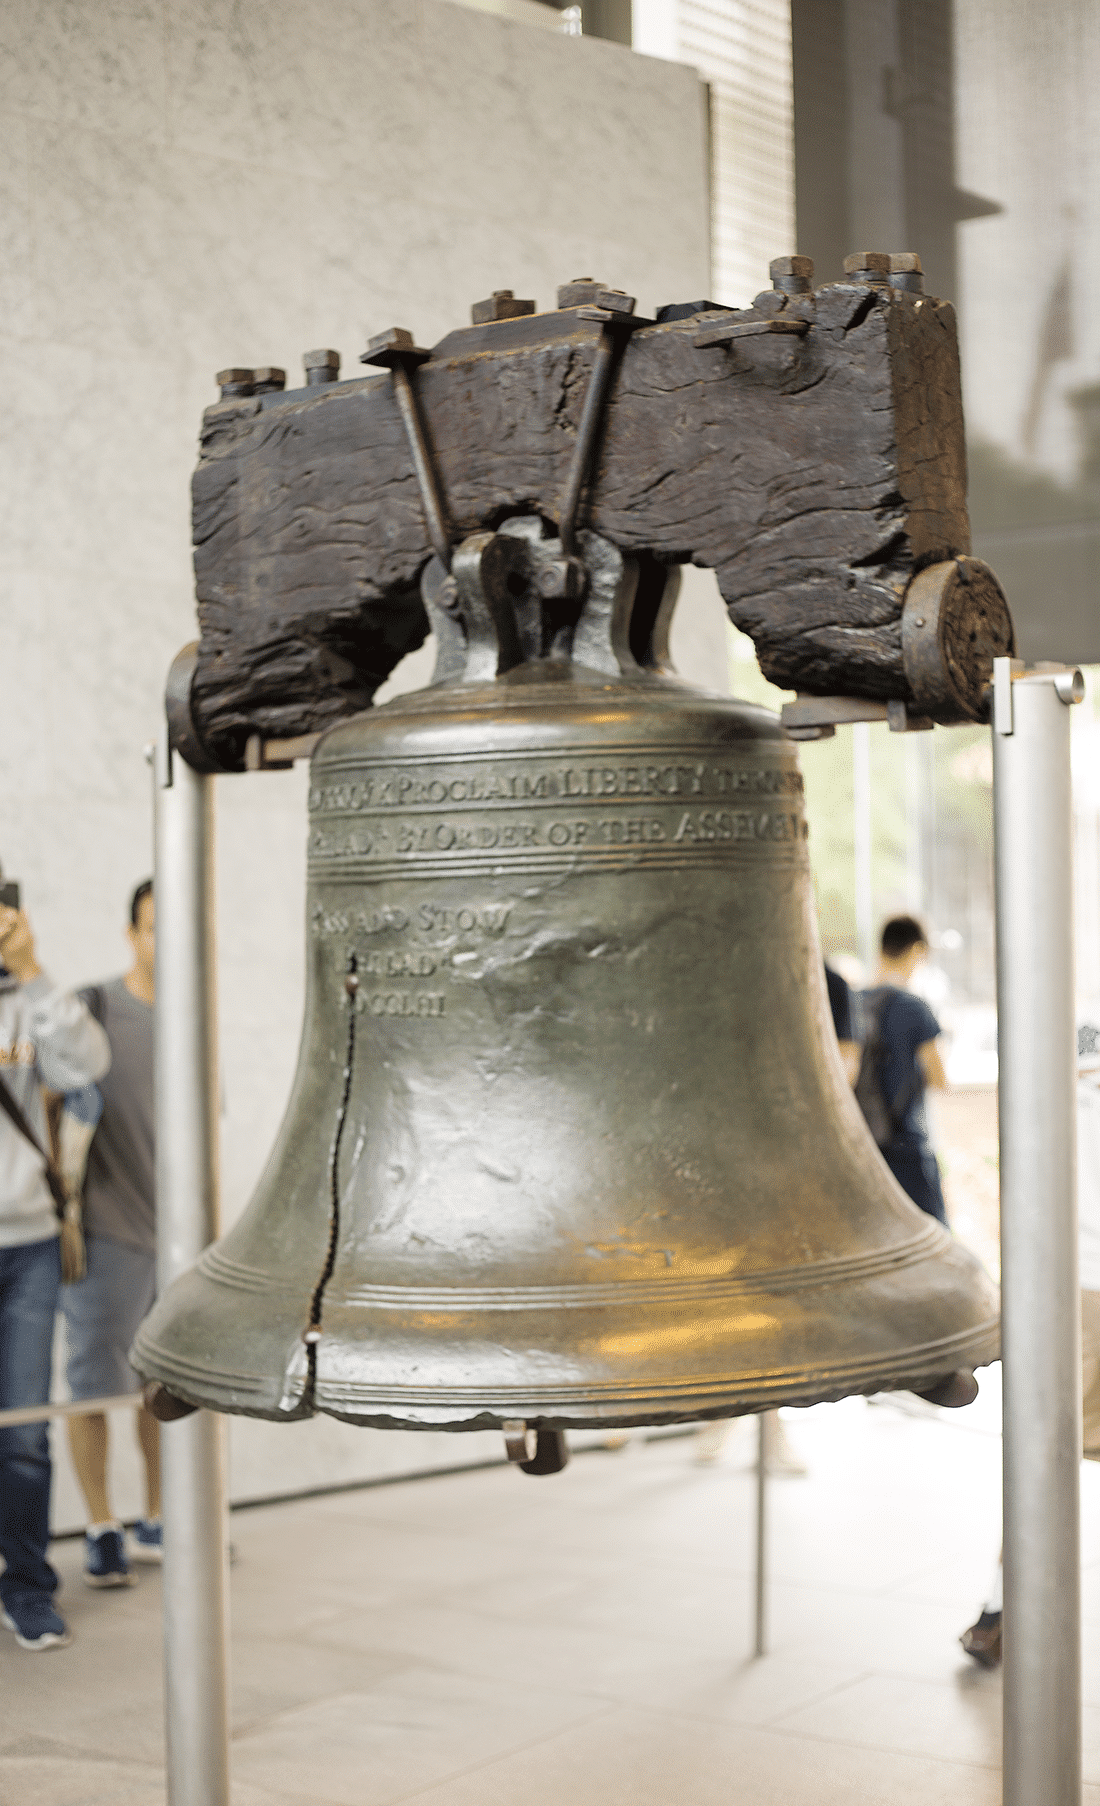  A weekend in Philadelphia: seeing the Liberty Bell. 